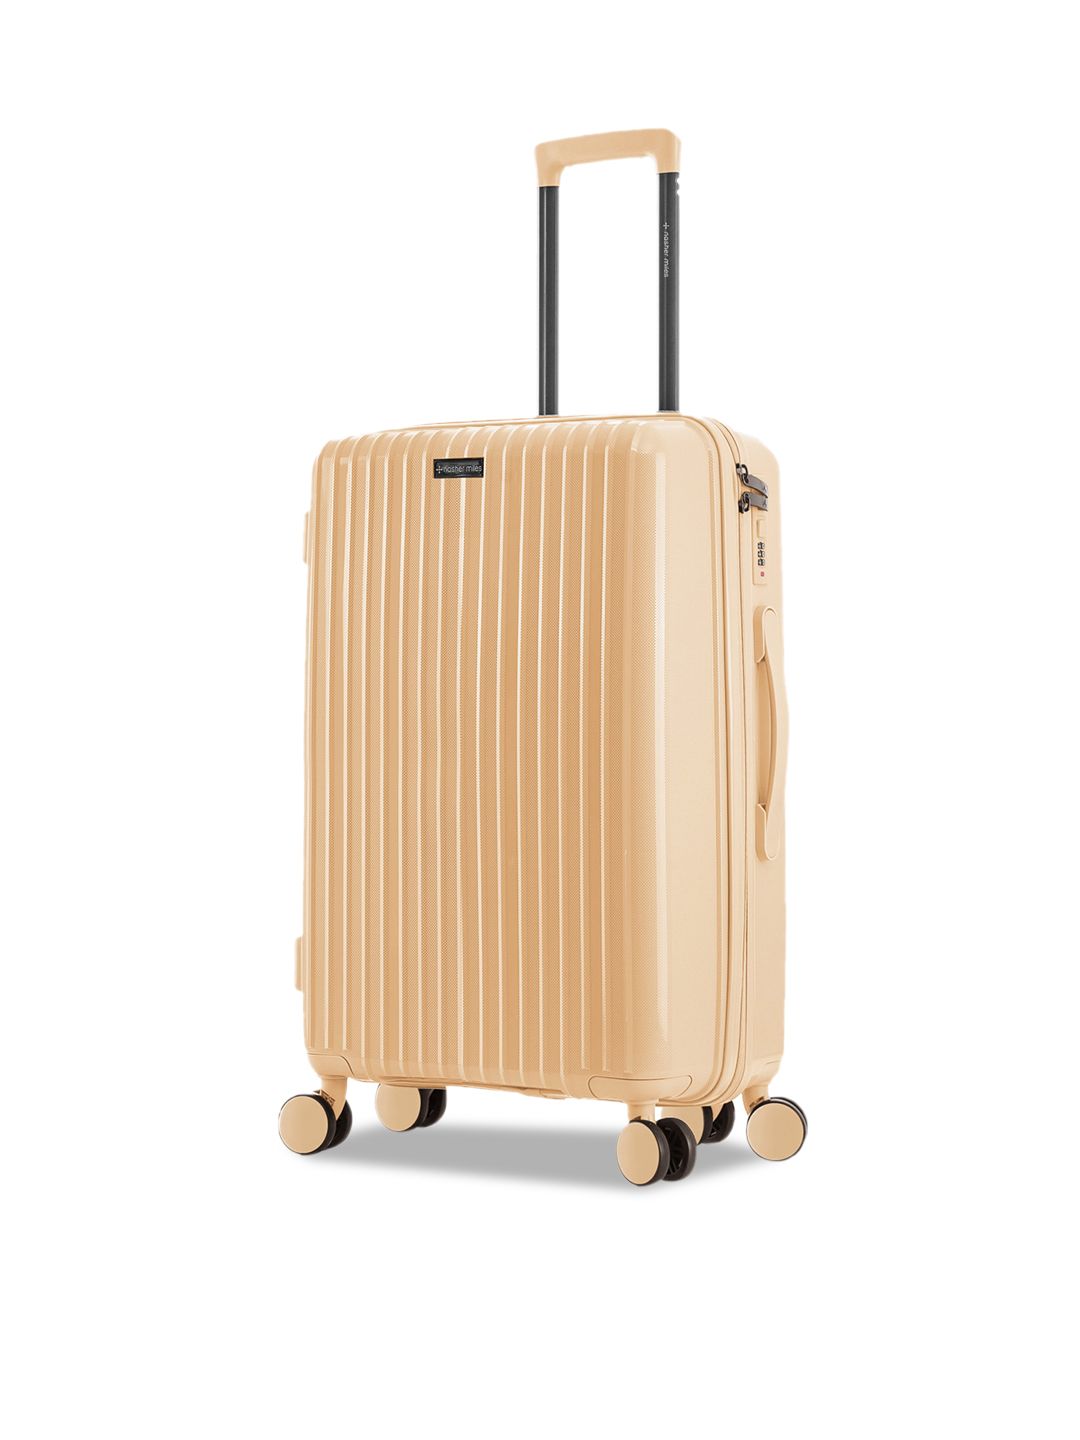 Nasher Miles Peach-Colored Textured Hard-Sided Medium Trolley Suitcase Price in India